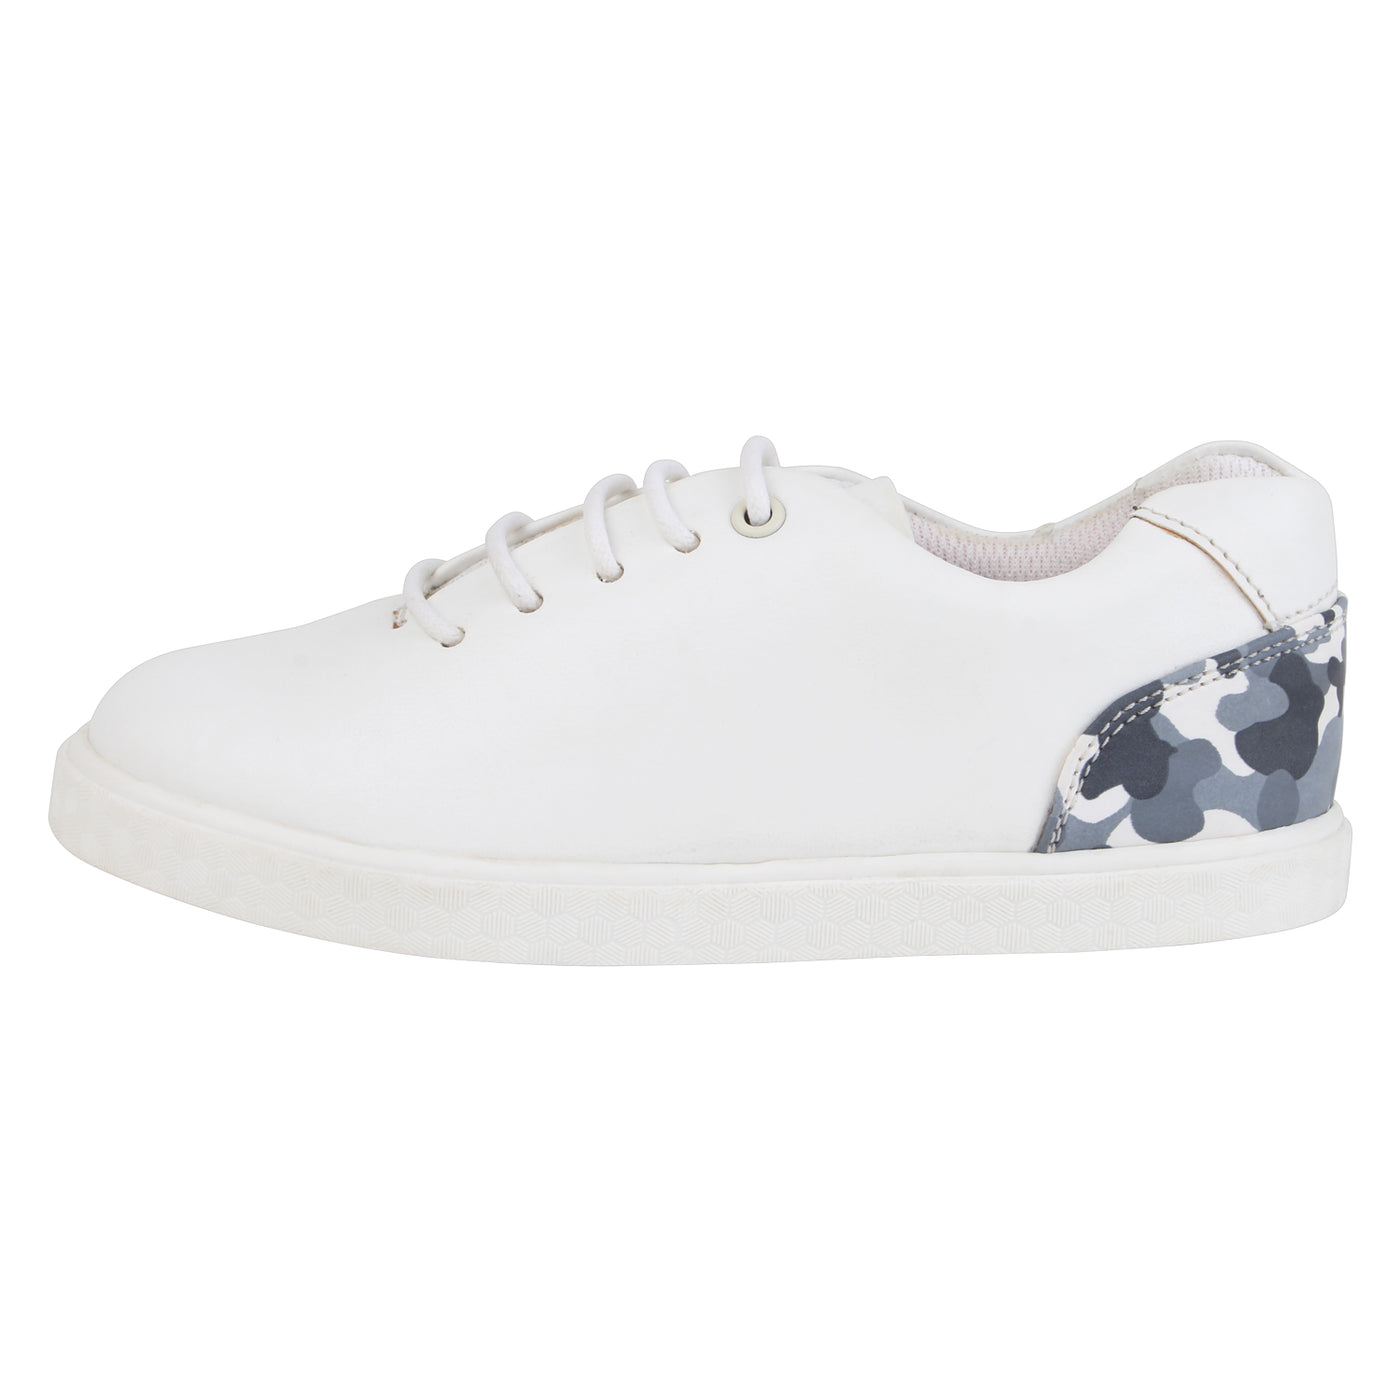 Buy Casual White Camo Pop For Kids